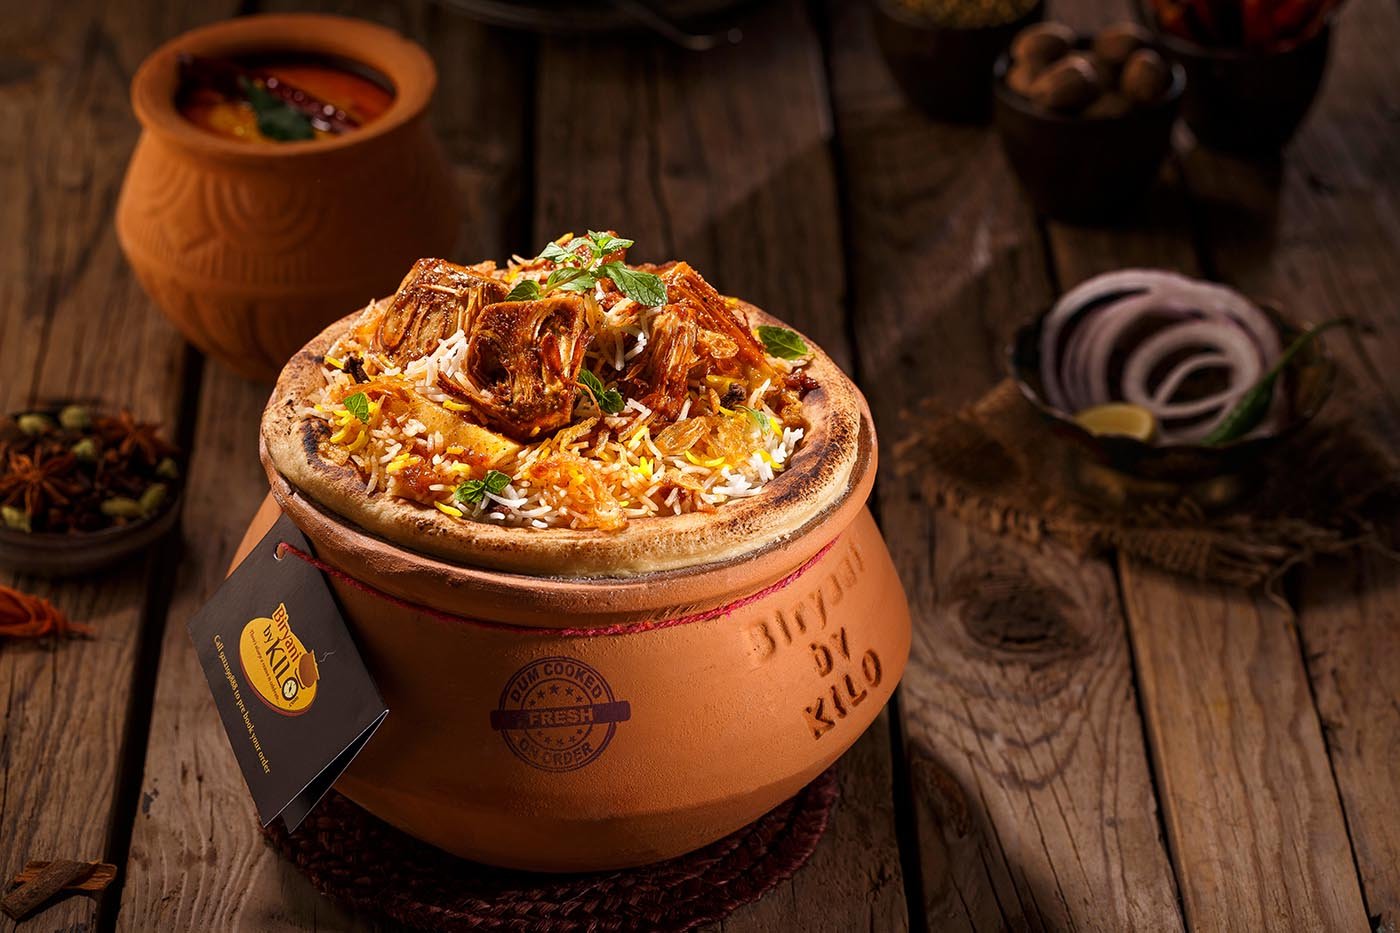 Get Your Biryani Served In The Handi It is Cooked In, Lifeinchd